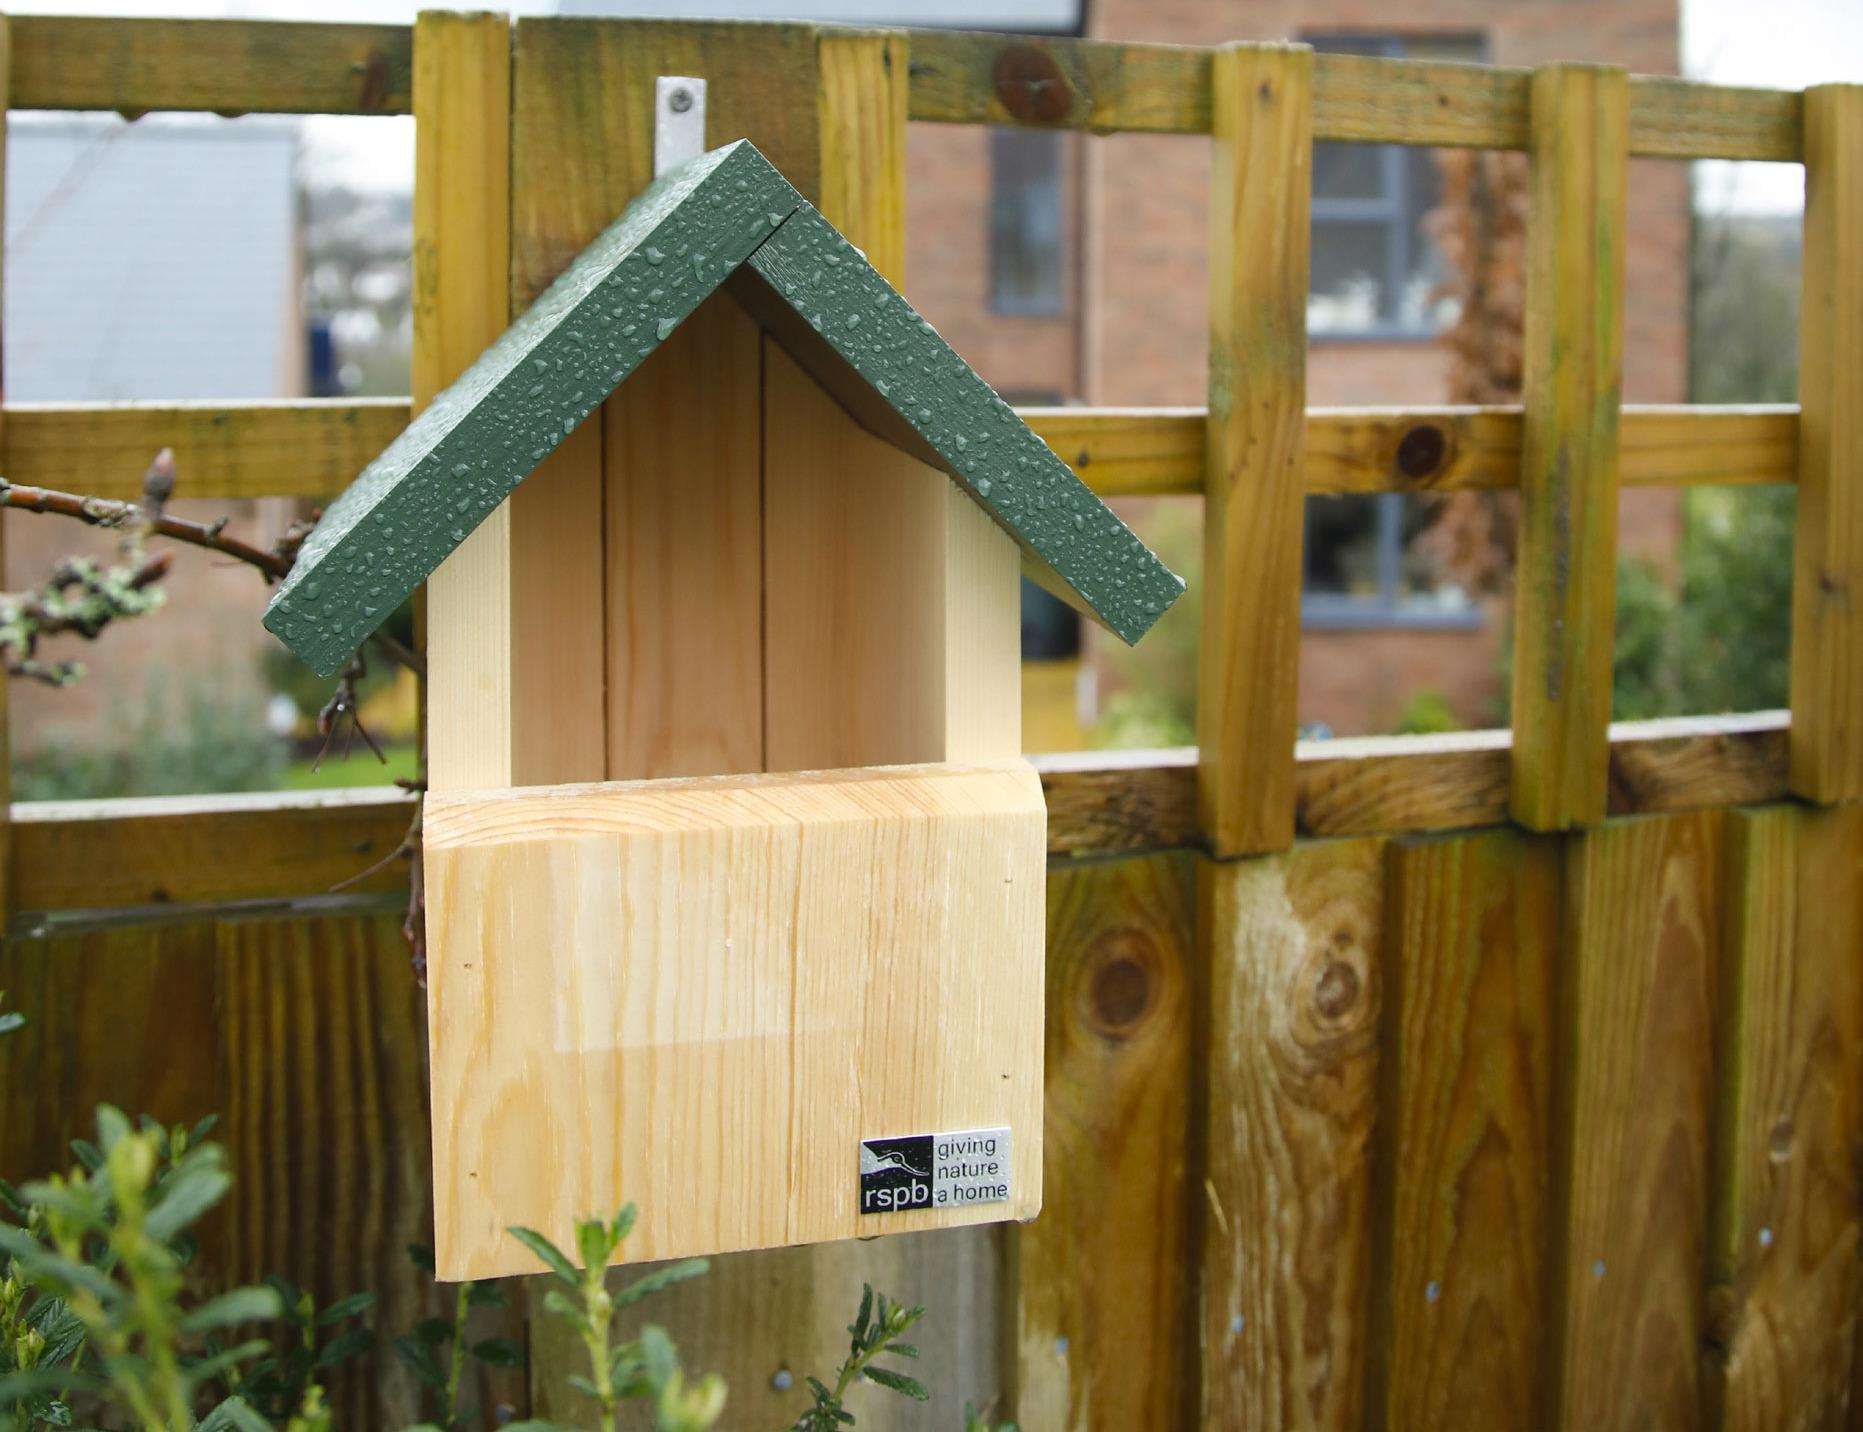 One of the nest boxes being fitted as part of the partnership (1393380)